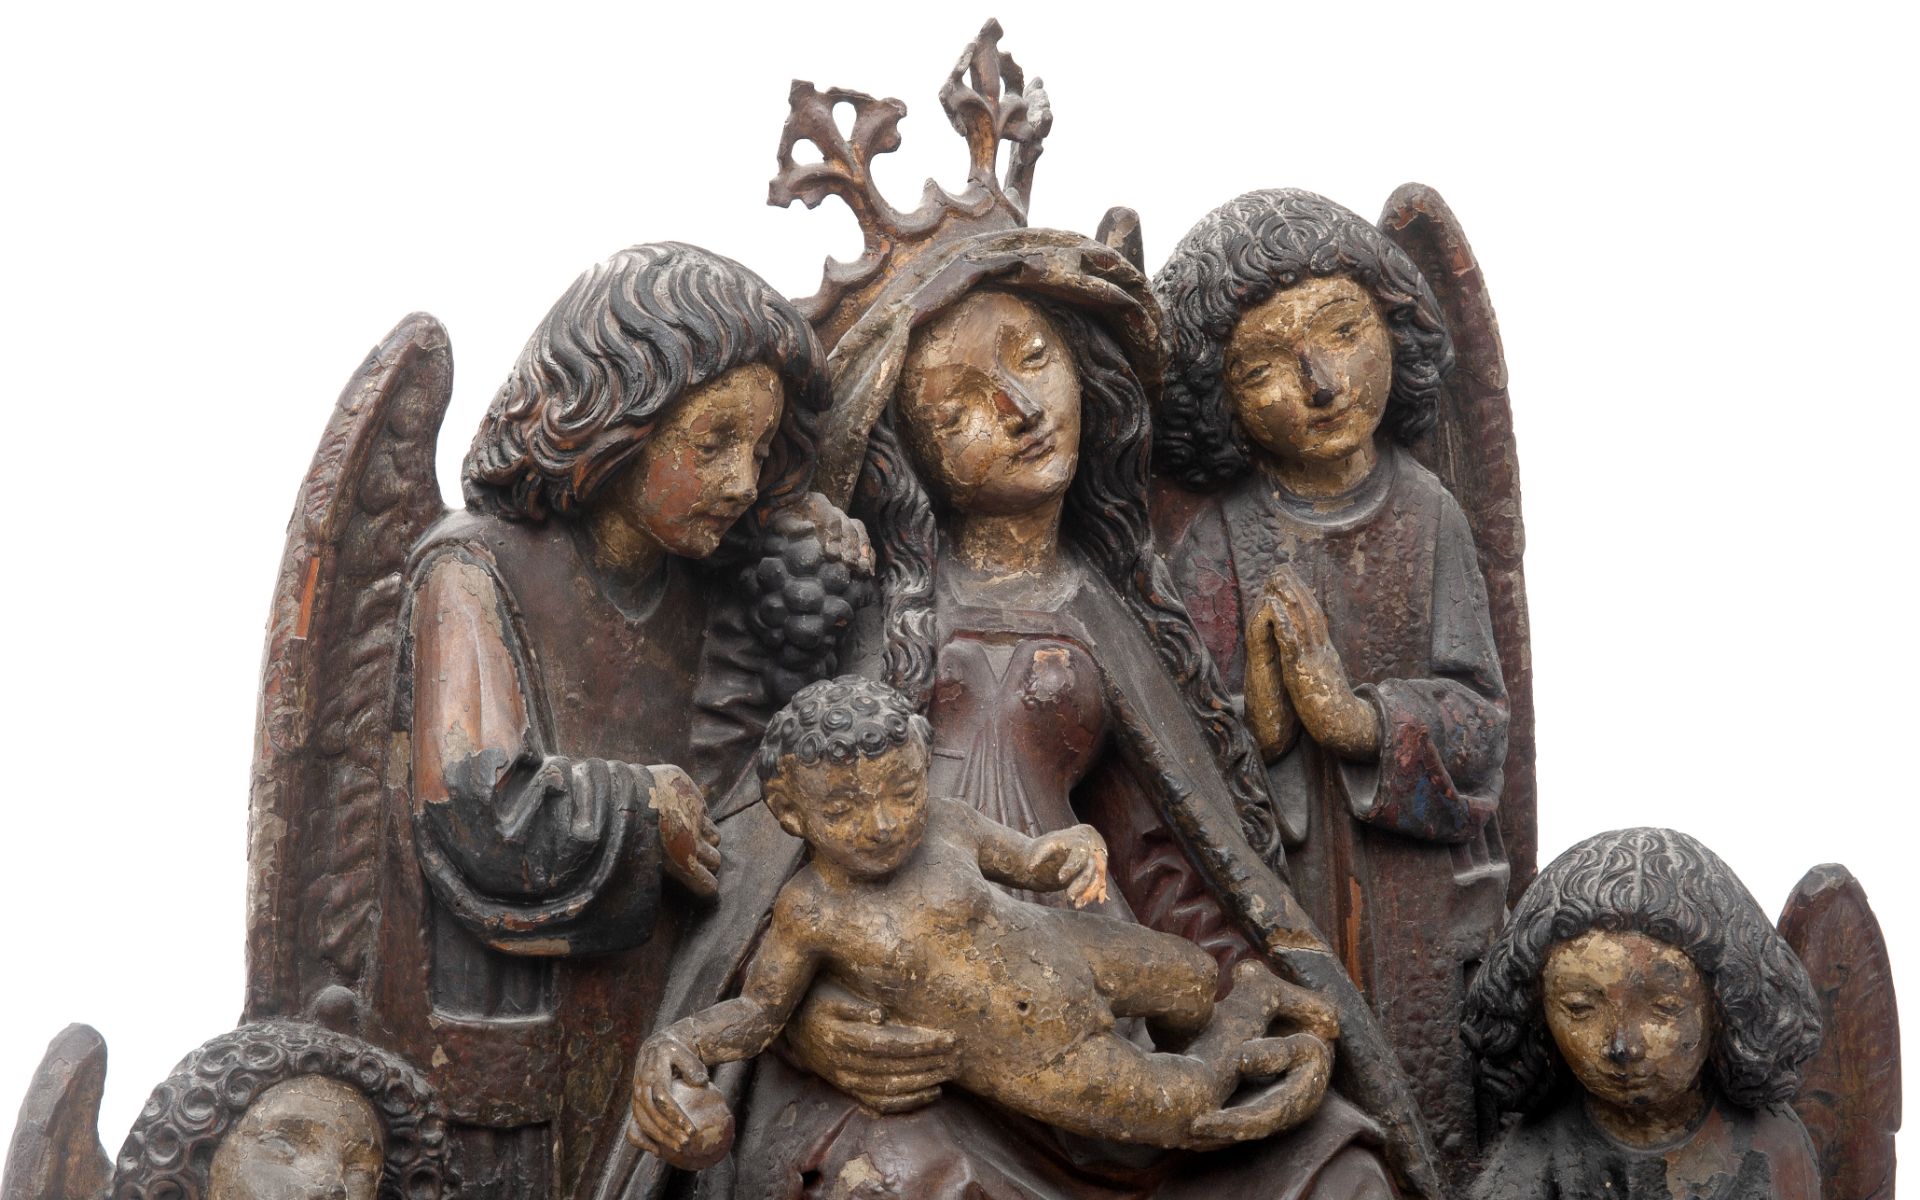 A 15TH CENTURY SOUTH GERMAN (ULM) FIGURAL GROUP OF THE VIRGIN AND CHILD CIRCA 1470 - Image 3 of 7